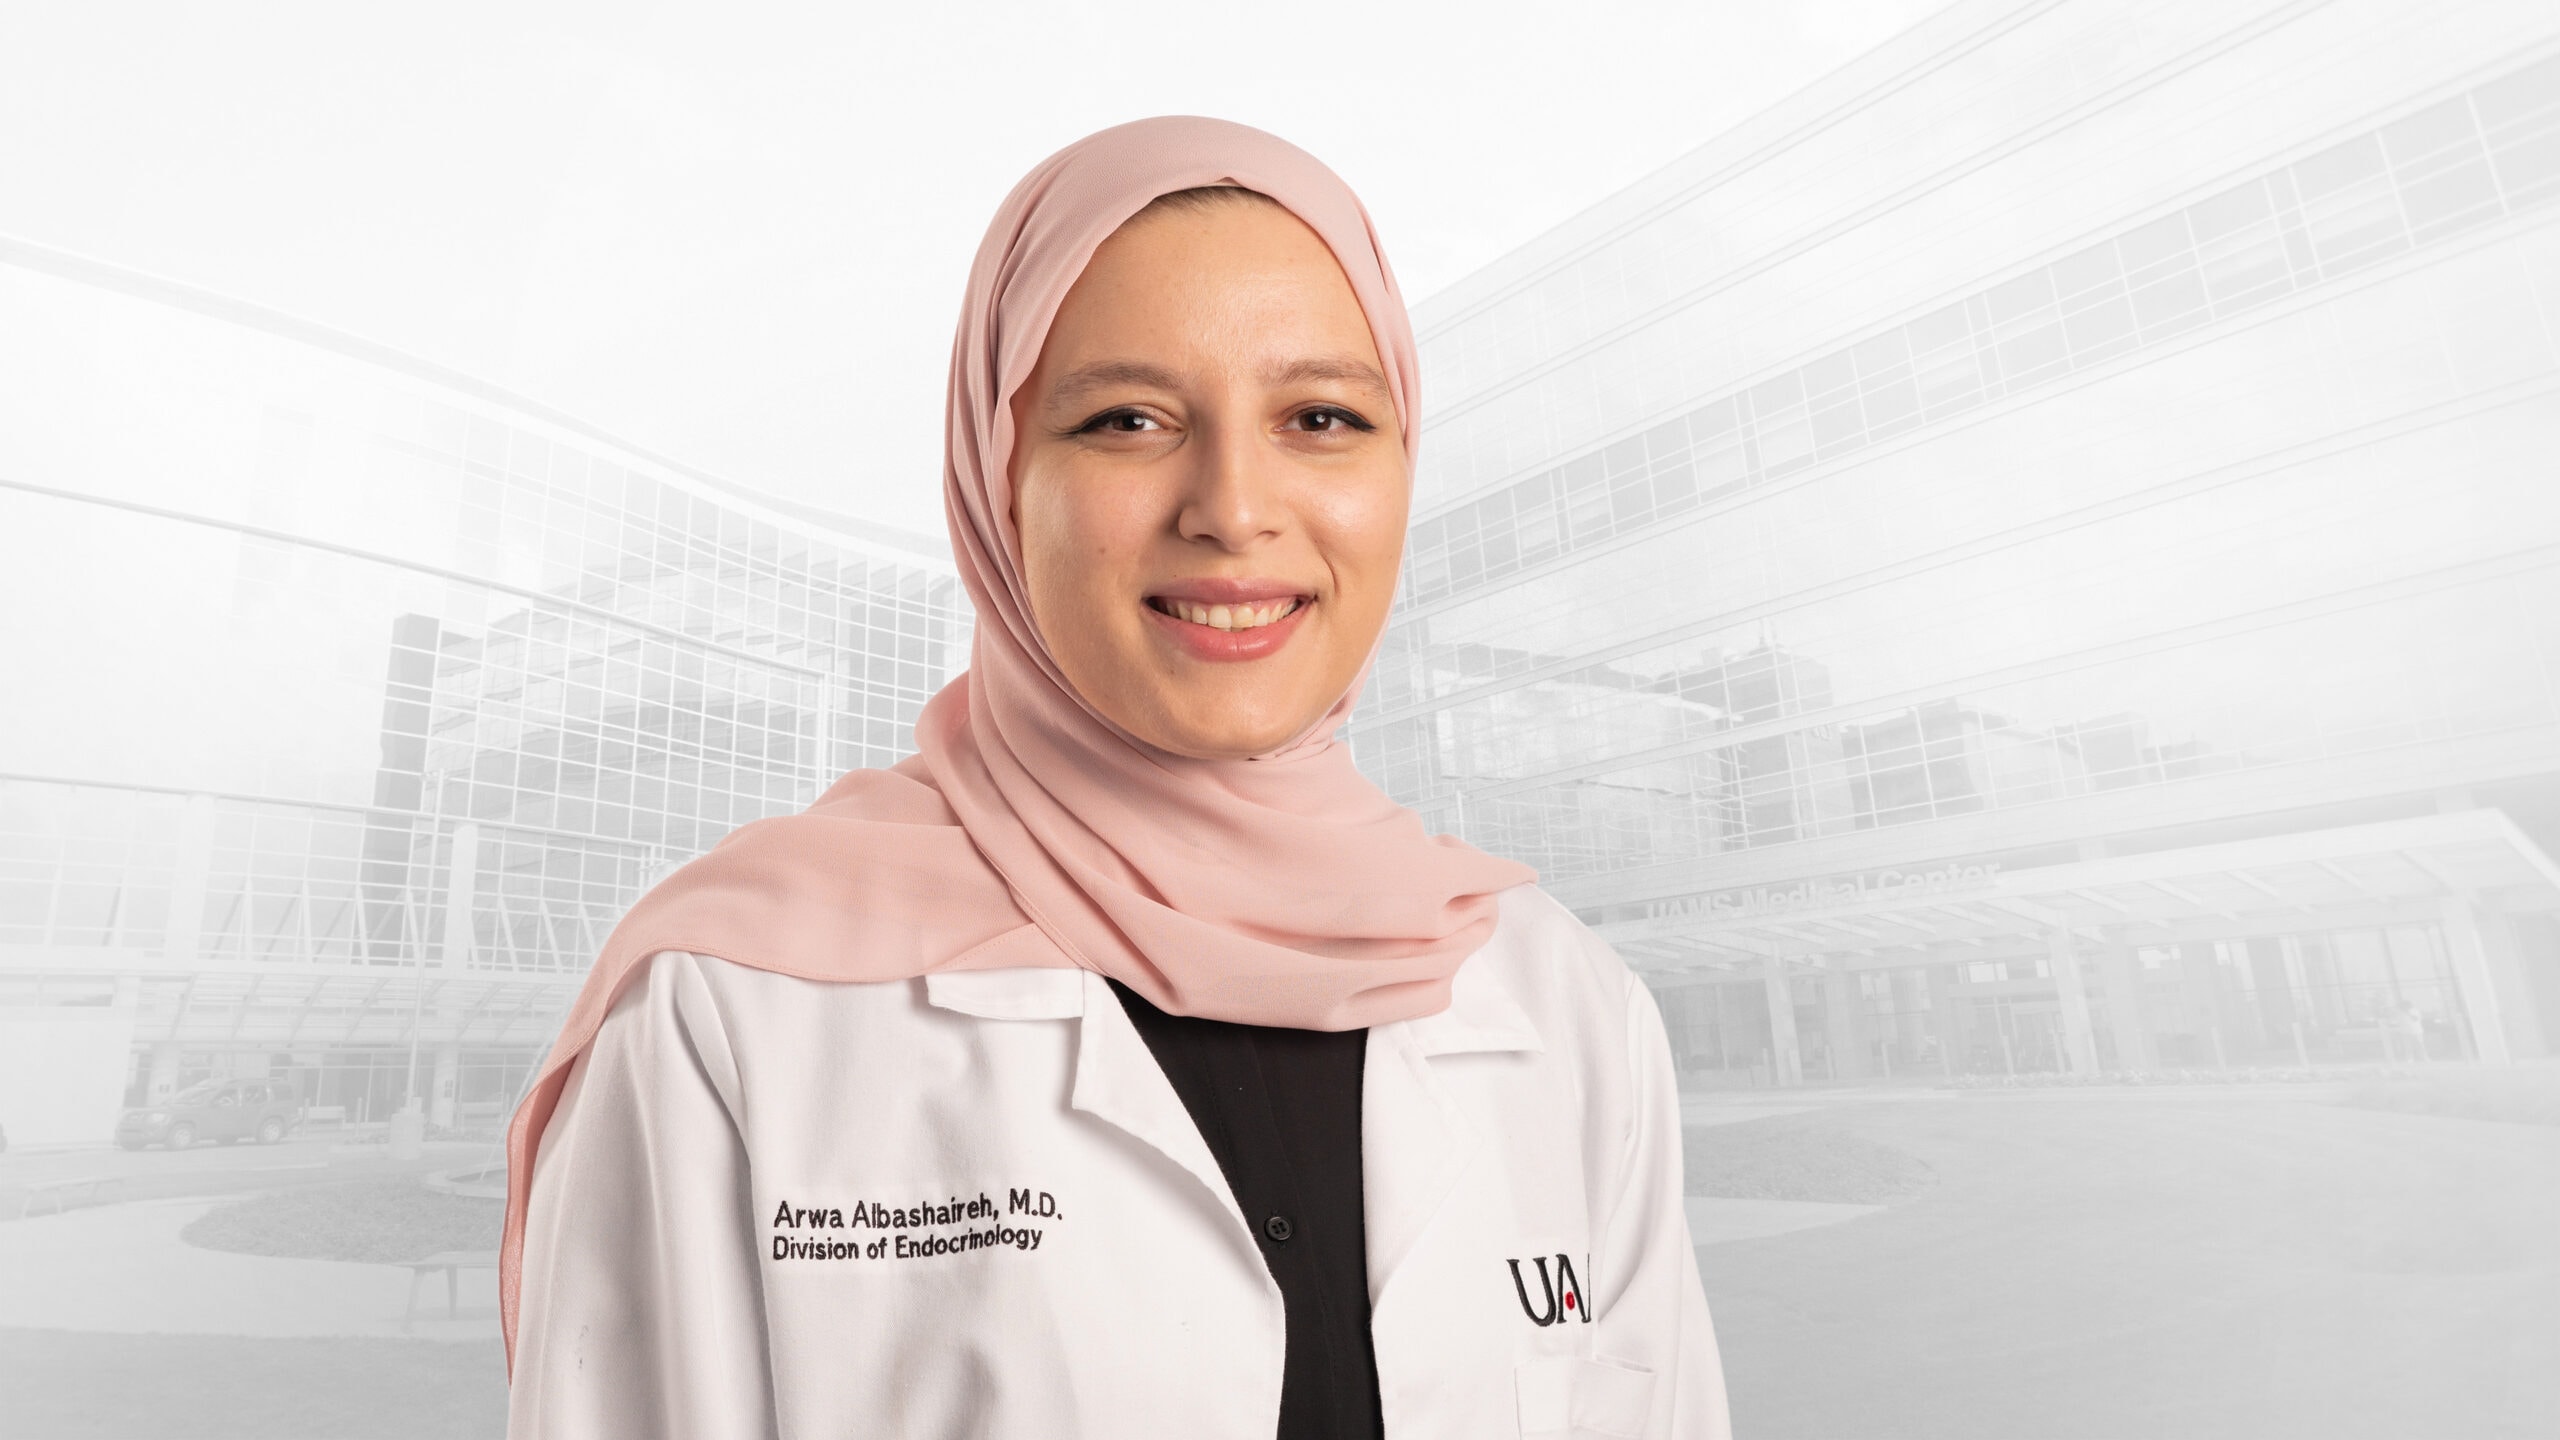 Endocrinologist Arwa Albashaireh, M.D., is seeing patients in the UAMS Endocrinology Clinic.